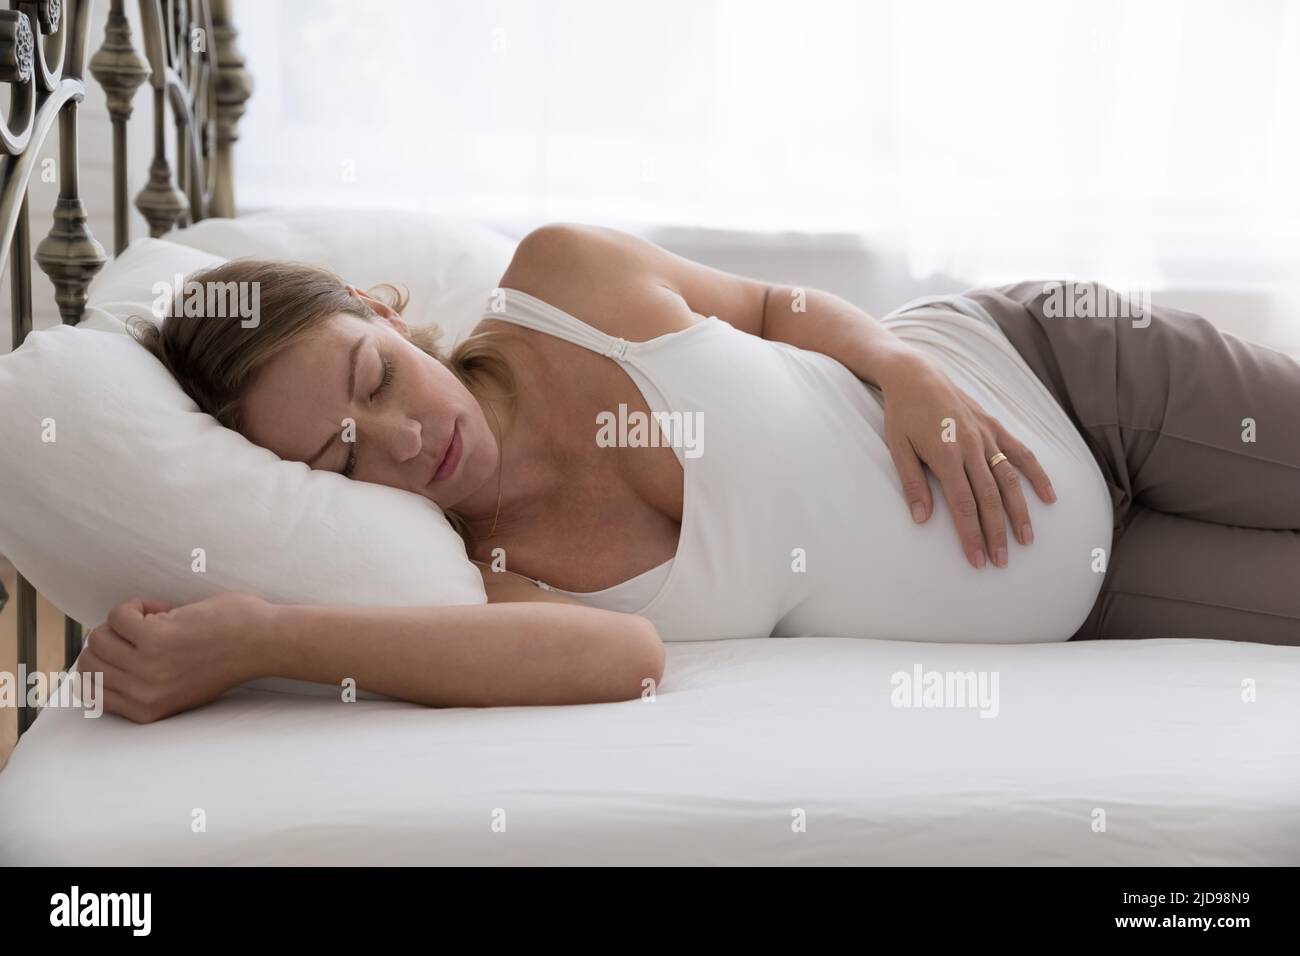 Pregnant woman sleeps in bed looking exhausted due hard pregnancy Stock Photo